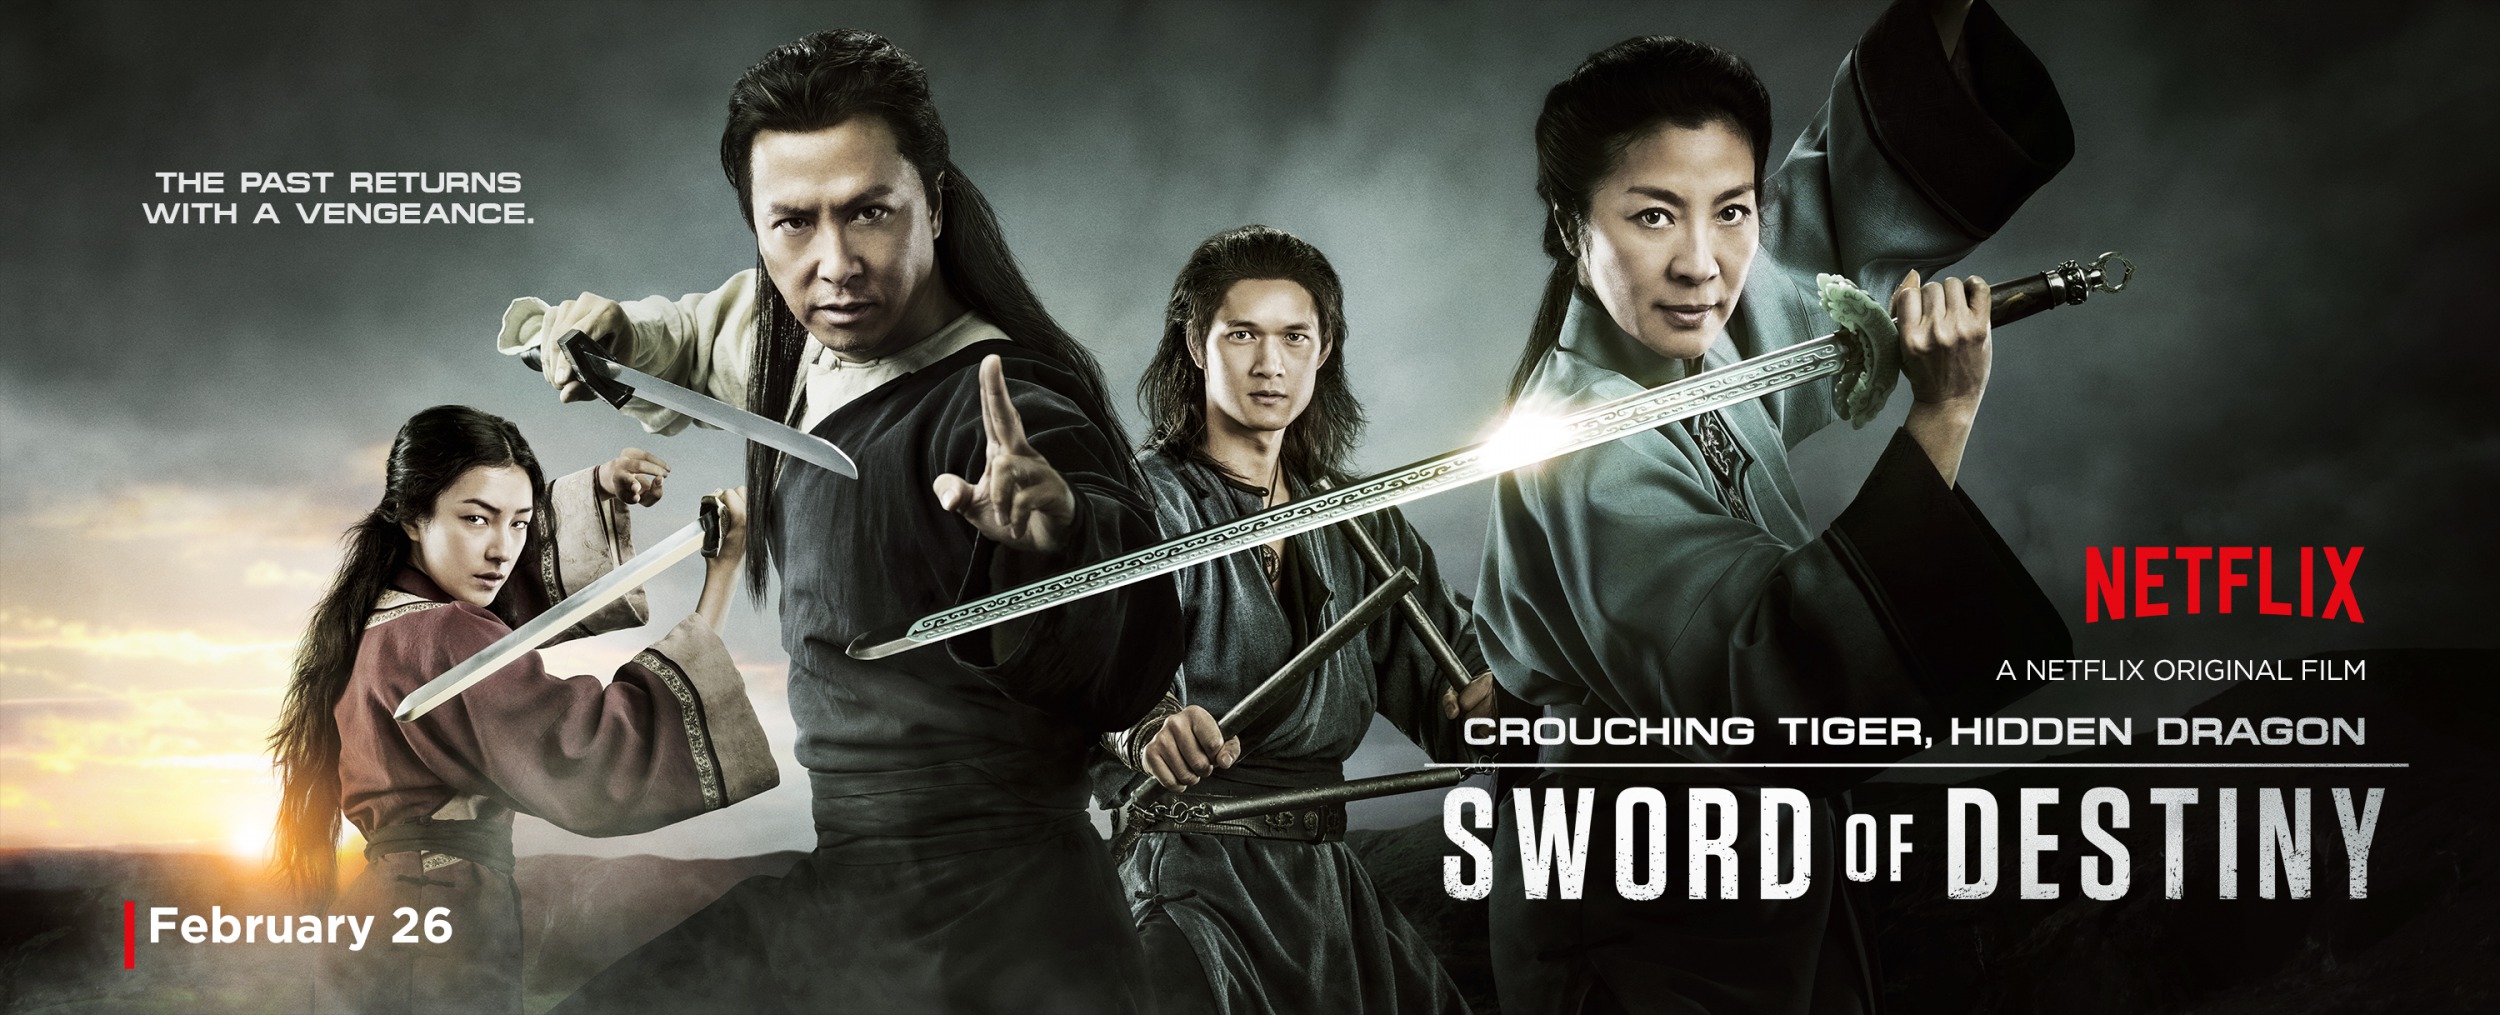 Mega Sized Movie Poster Image for Crouching Tiger, Hidden Dragon: Sword of Destiny (#2 of 16)